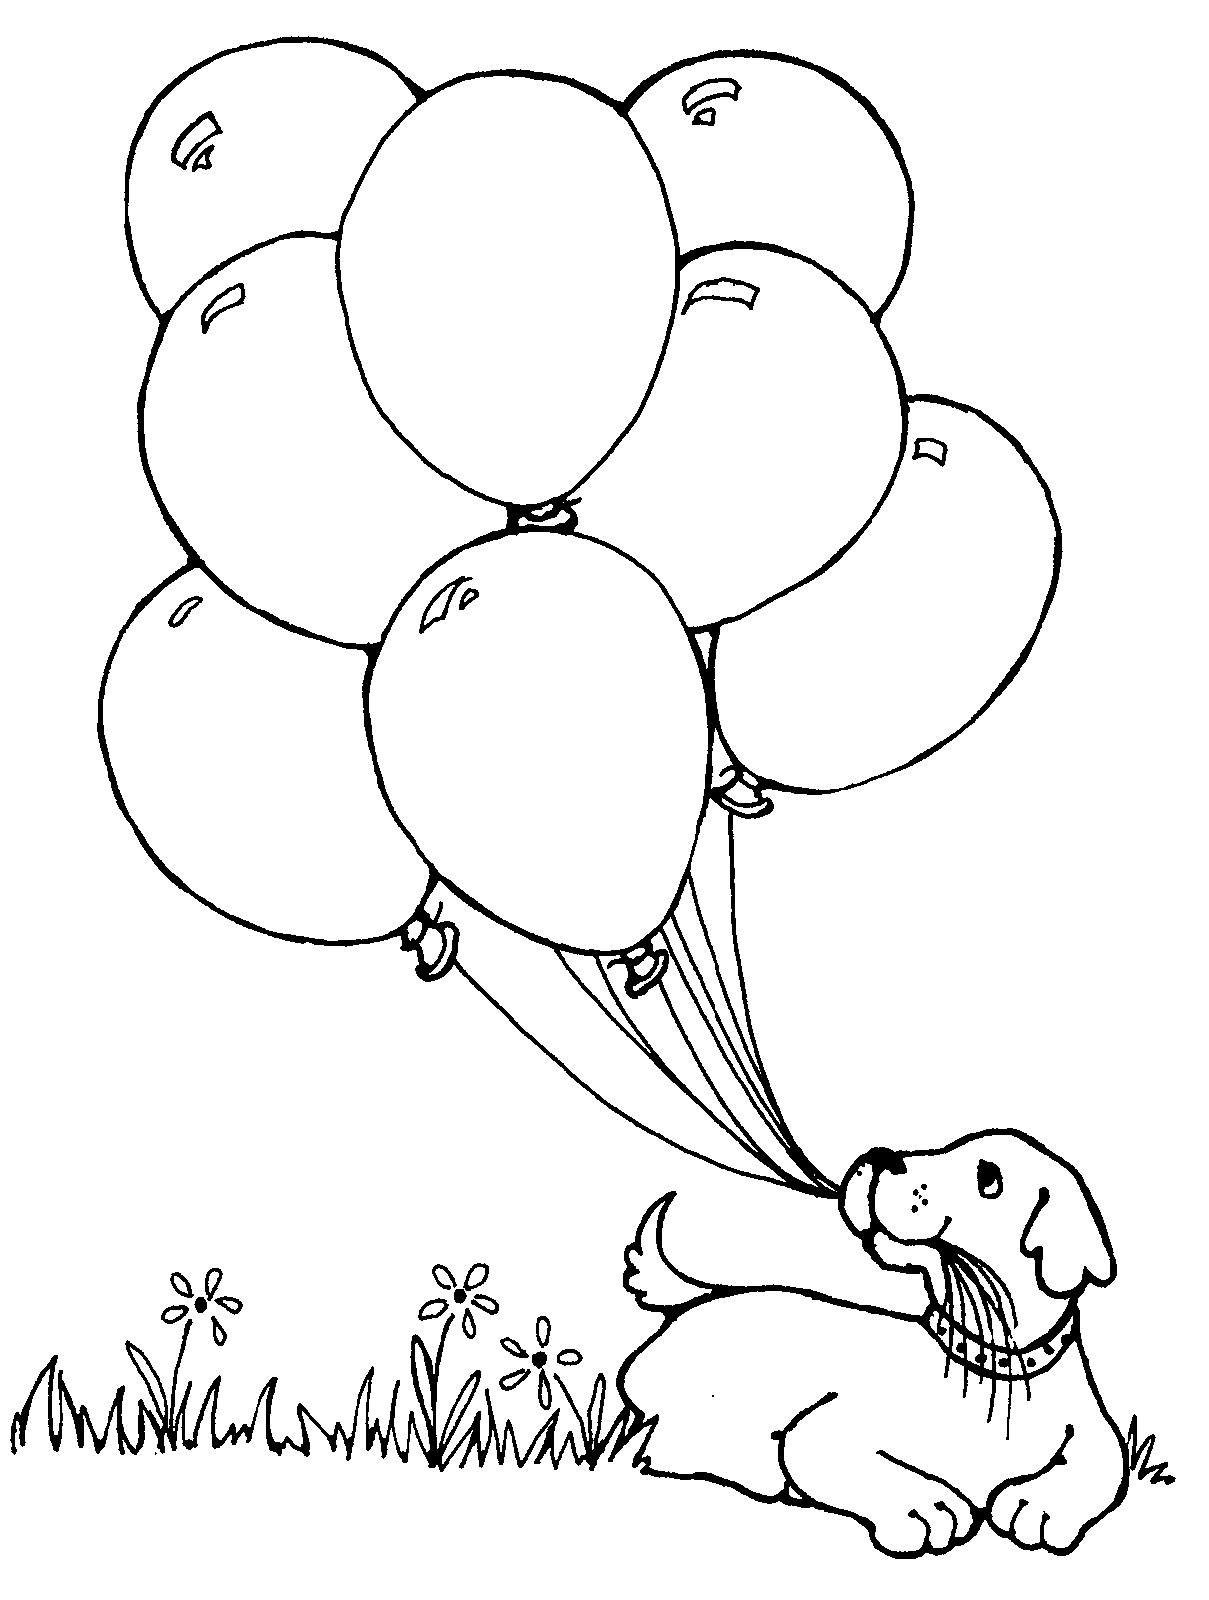 balloon coloring pages with dog Coloring4free